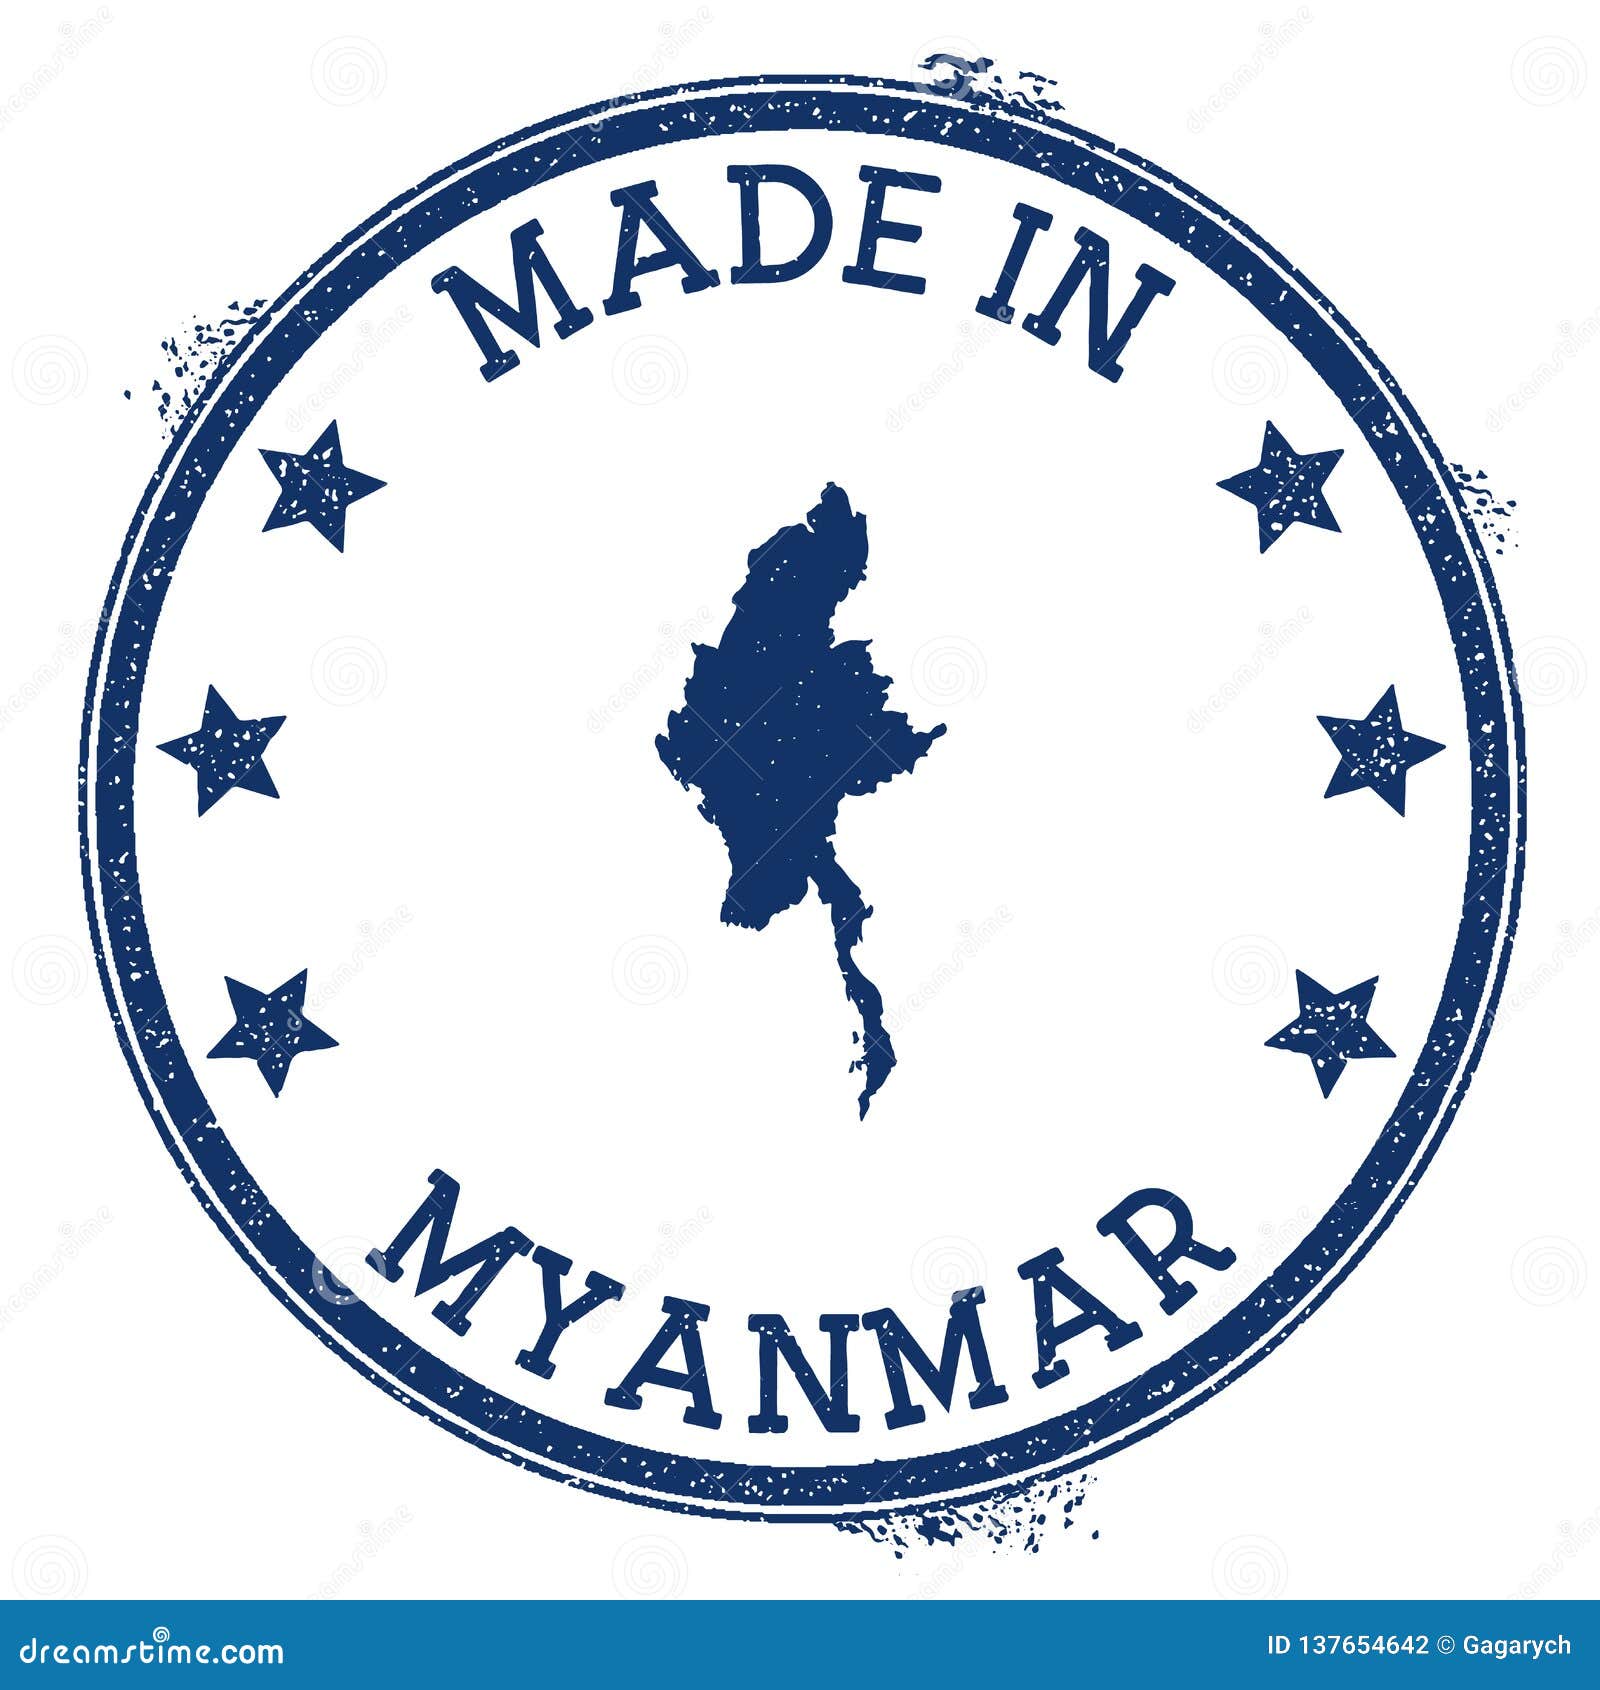 Made in Myanmar Страна производитель. Made in Myanmar Страна. Made in Myanmar Страна производитель бренда. Made in myanmar